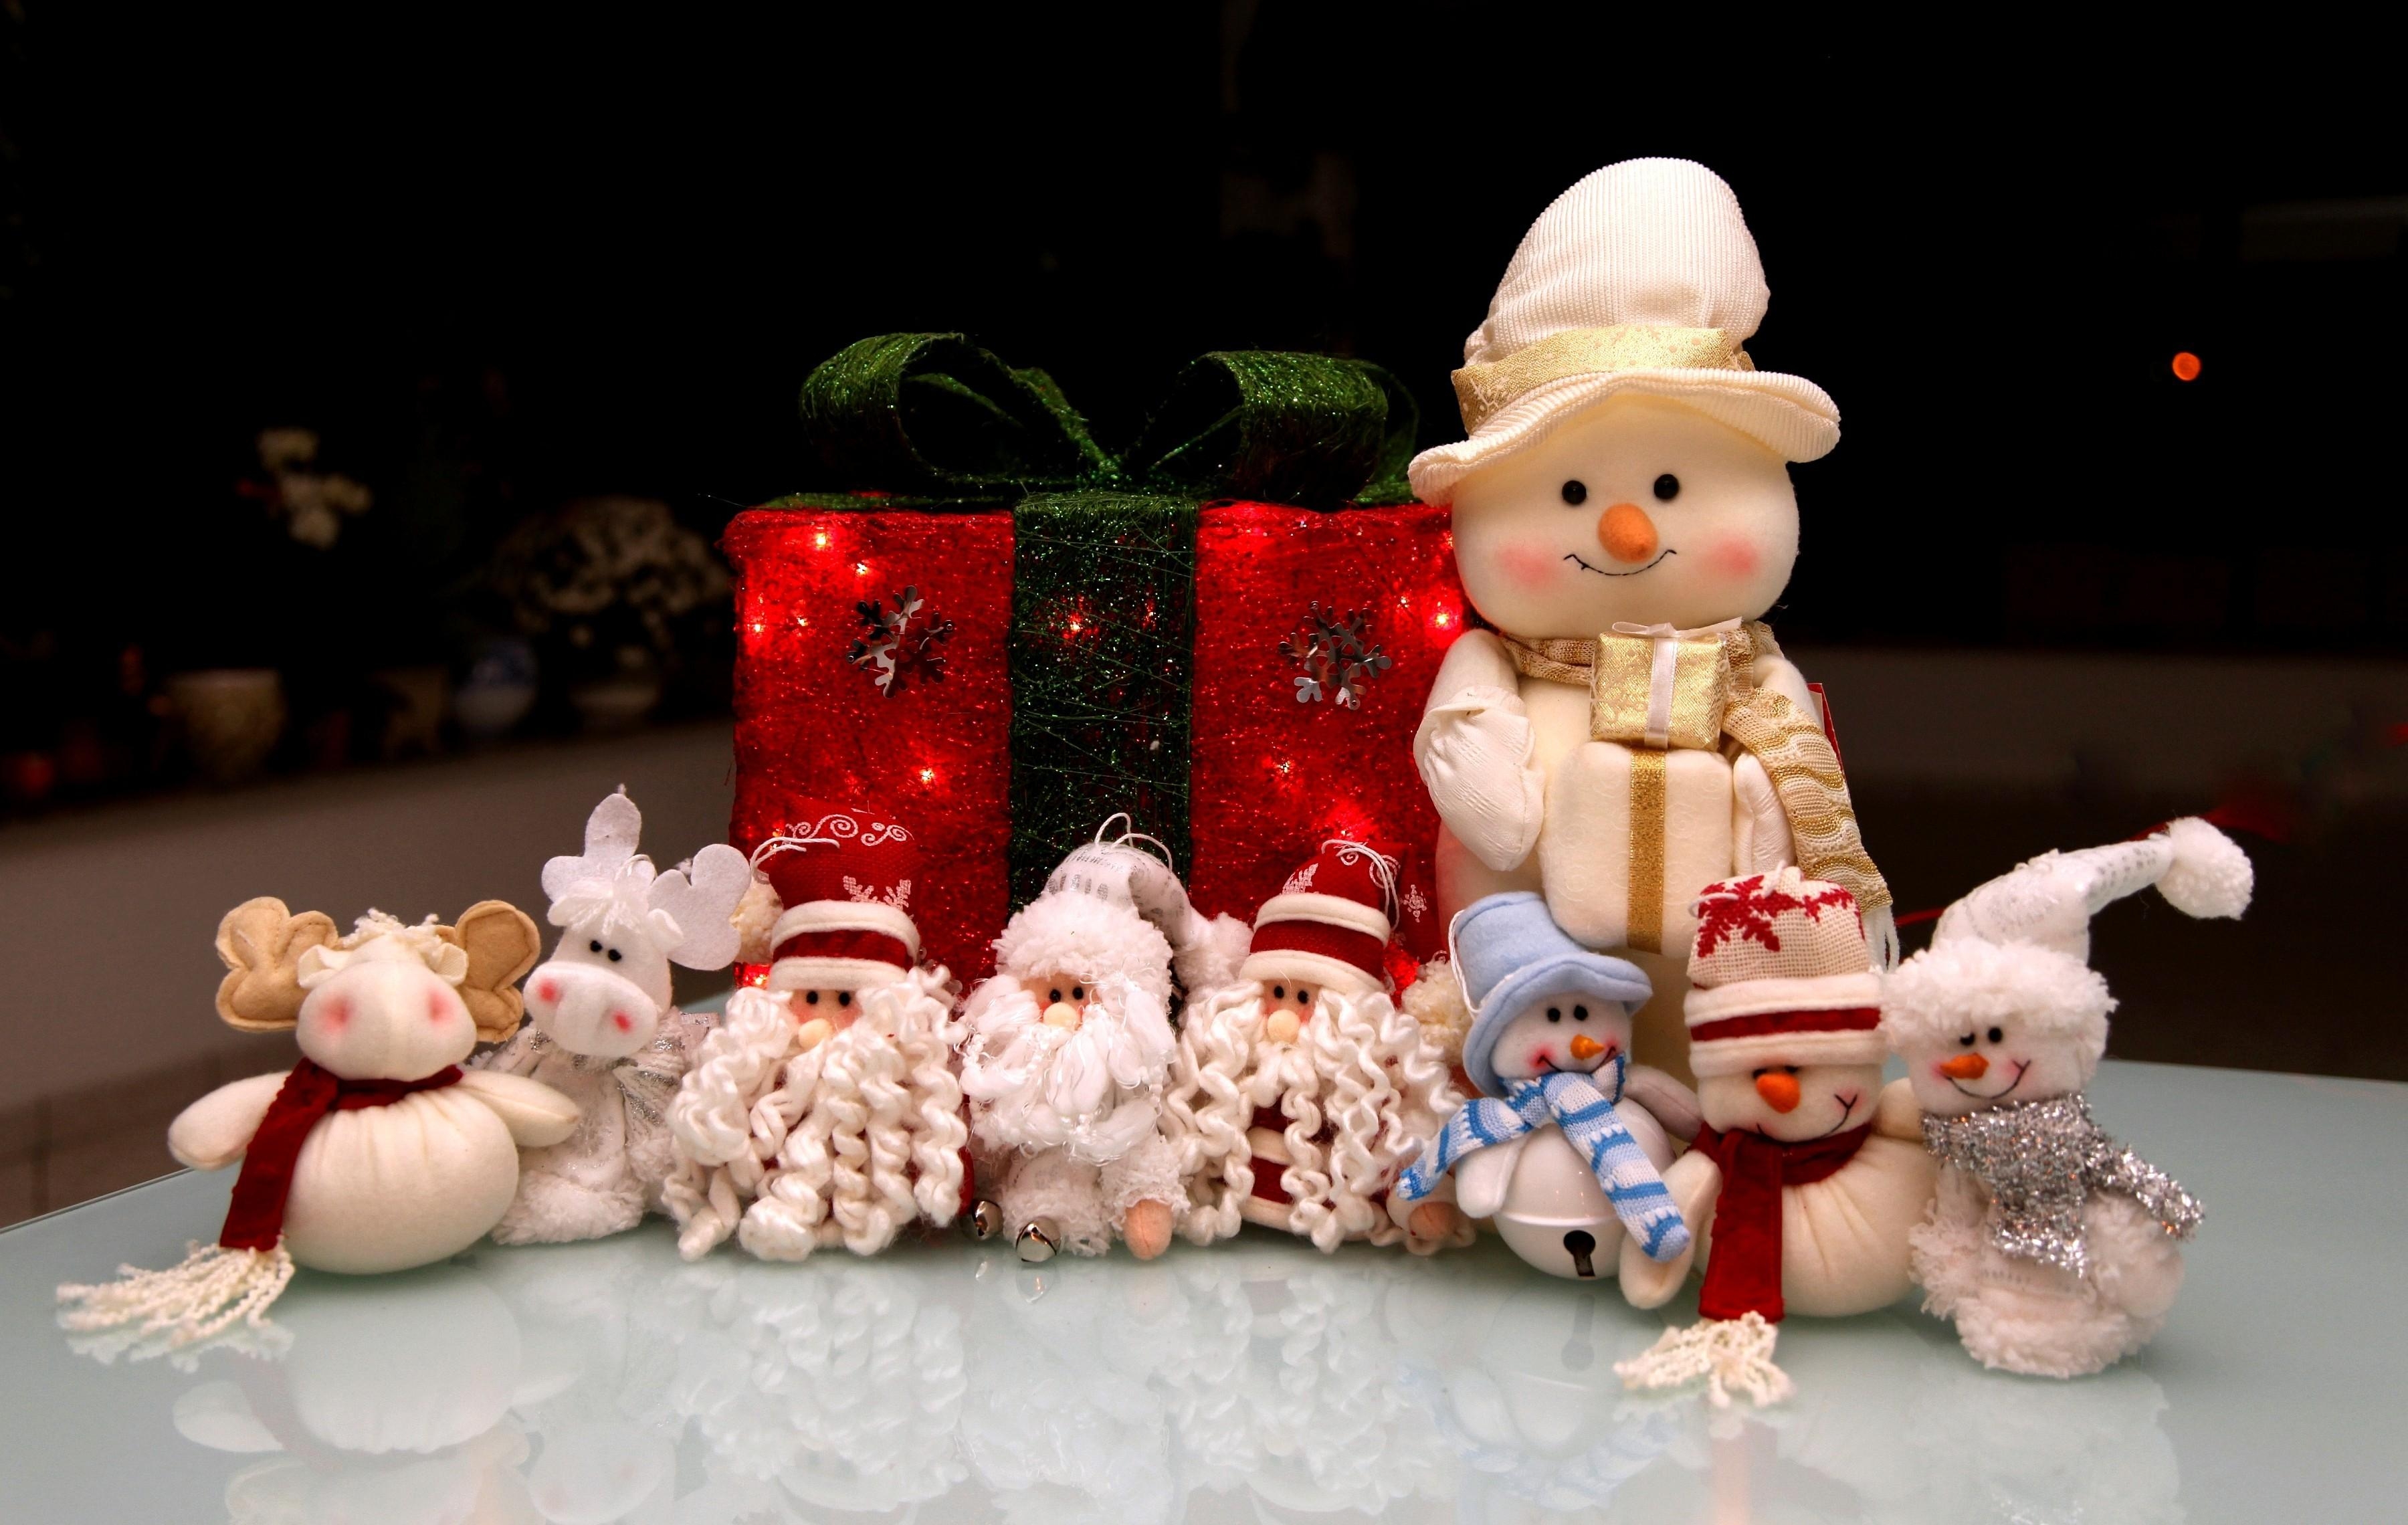 holidays, new year, toys, snowman, christmas, holiday, present, gift, santas, grandfathers frosts